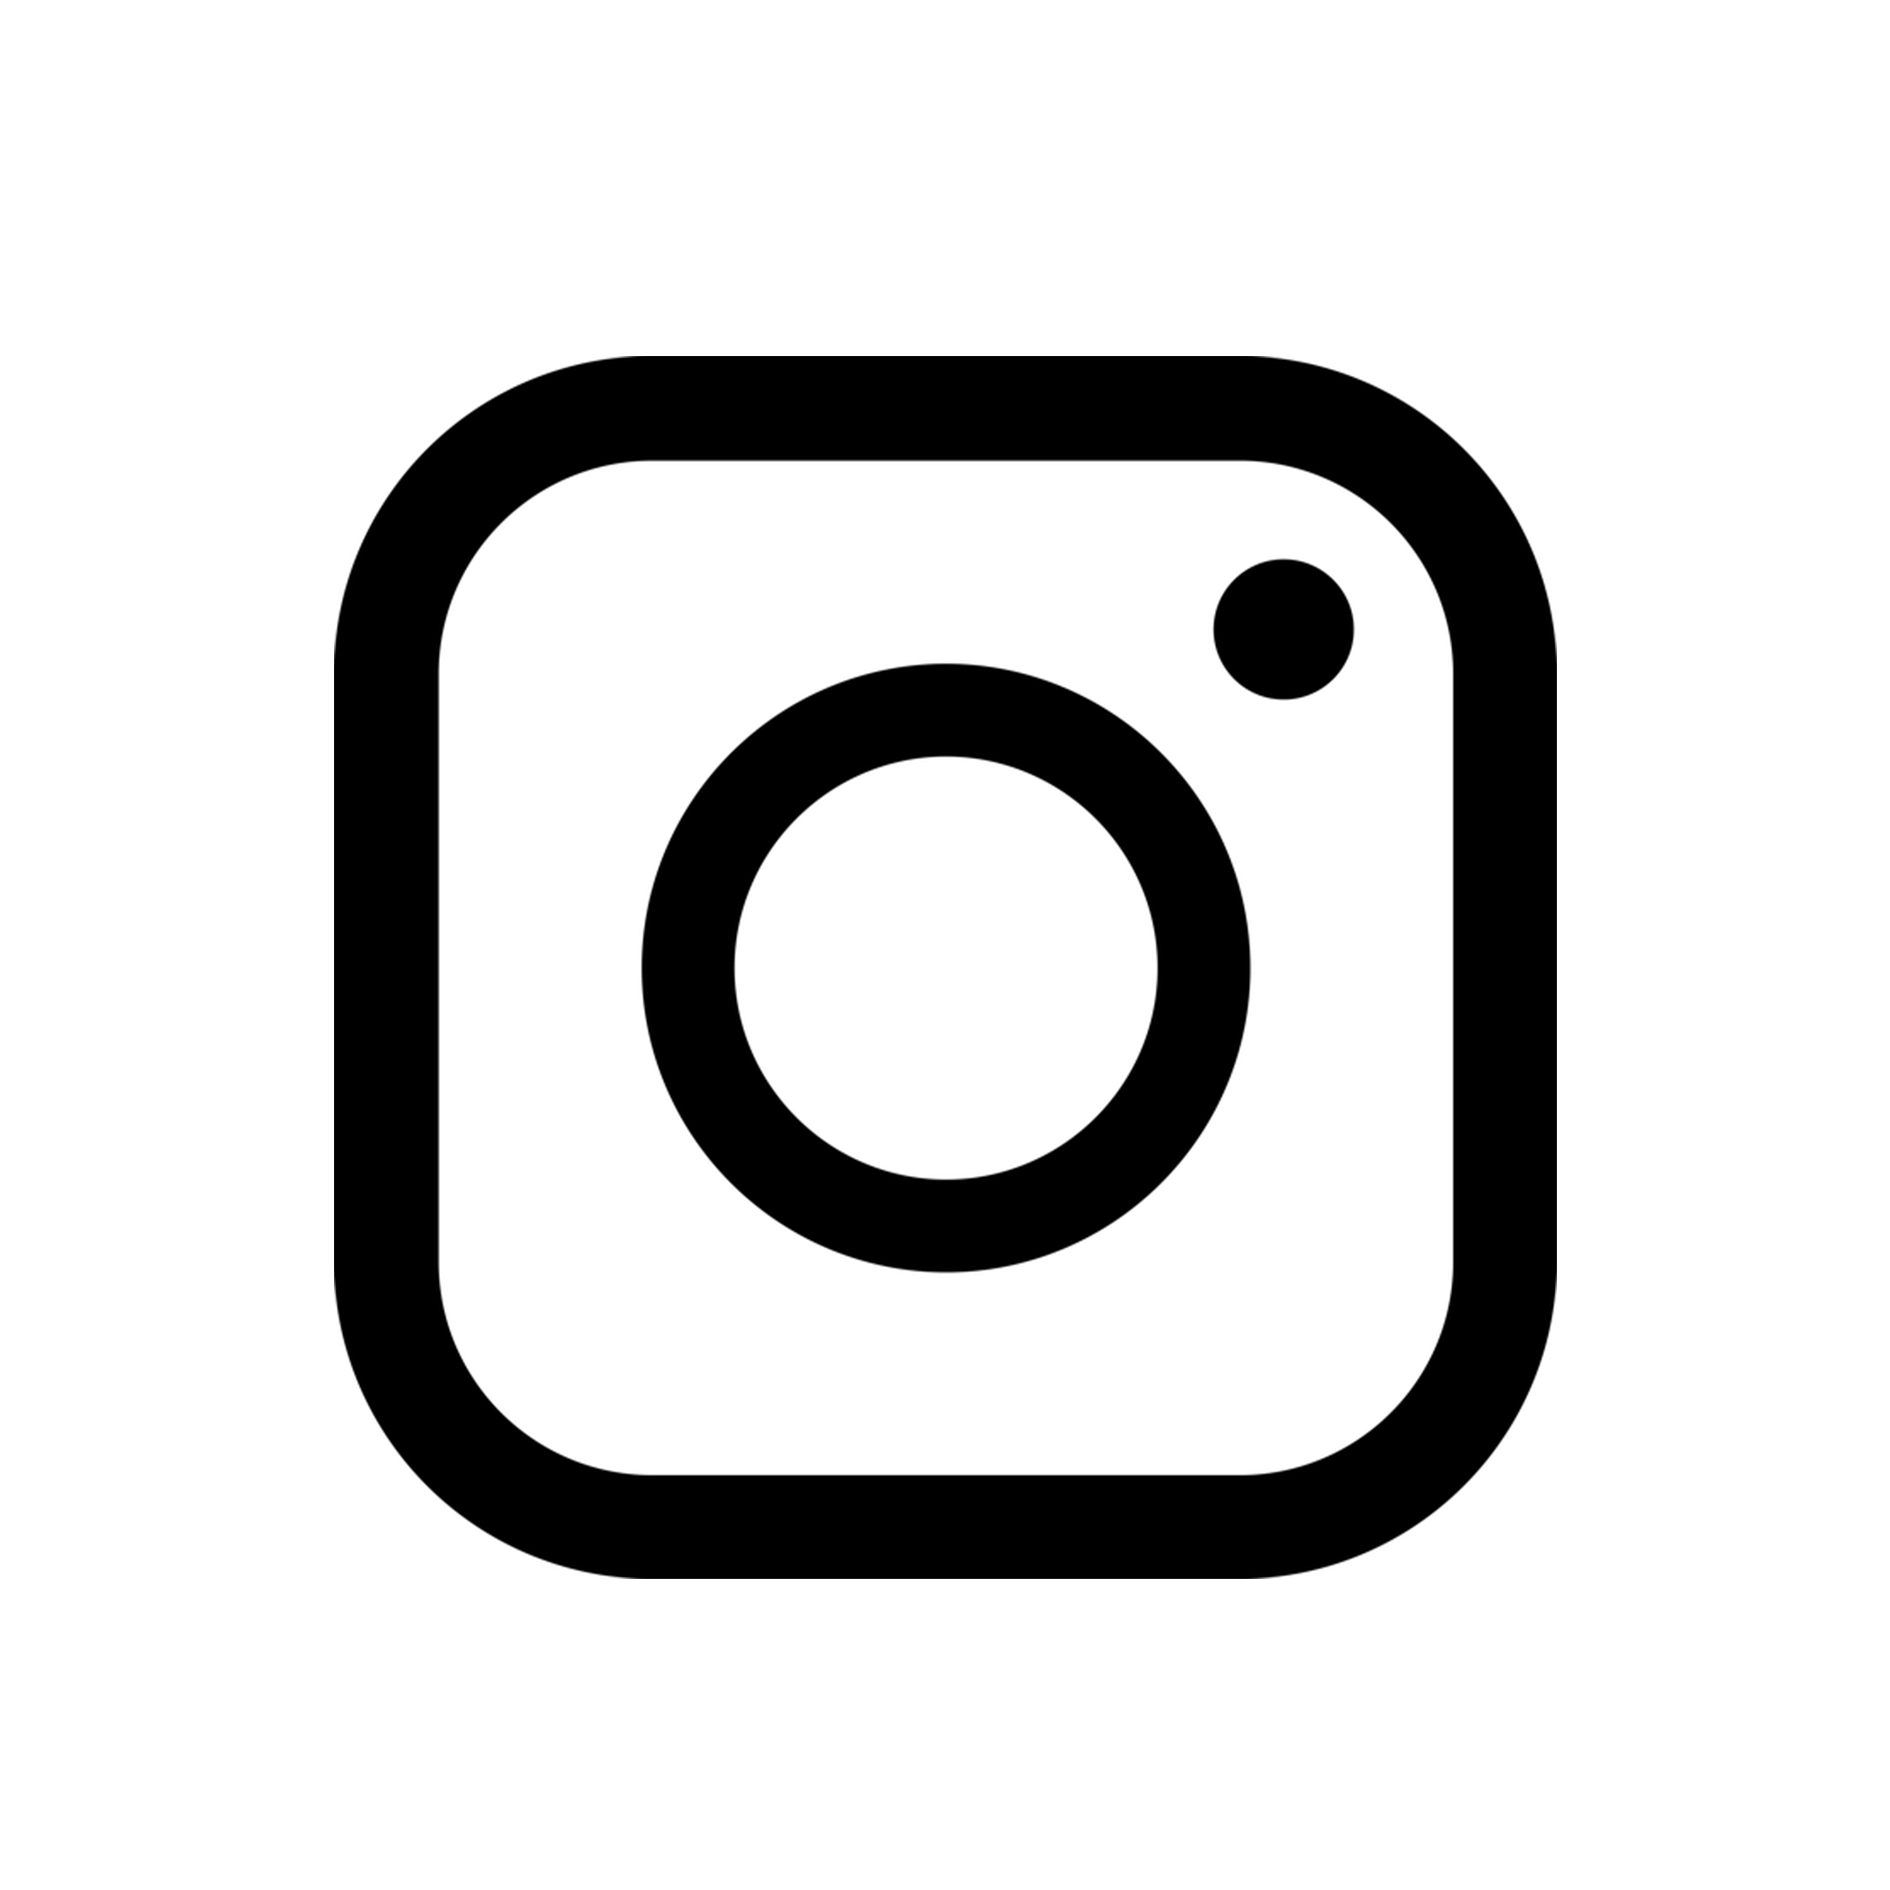 Real Instagram Logo - Instagram logo png black and white download - RR collections